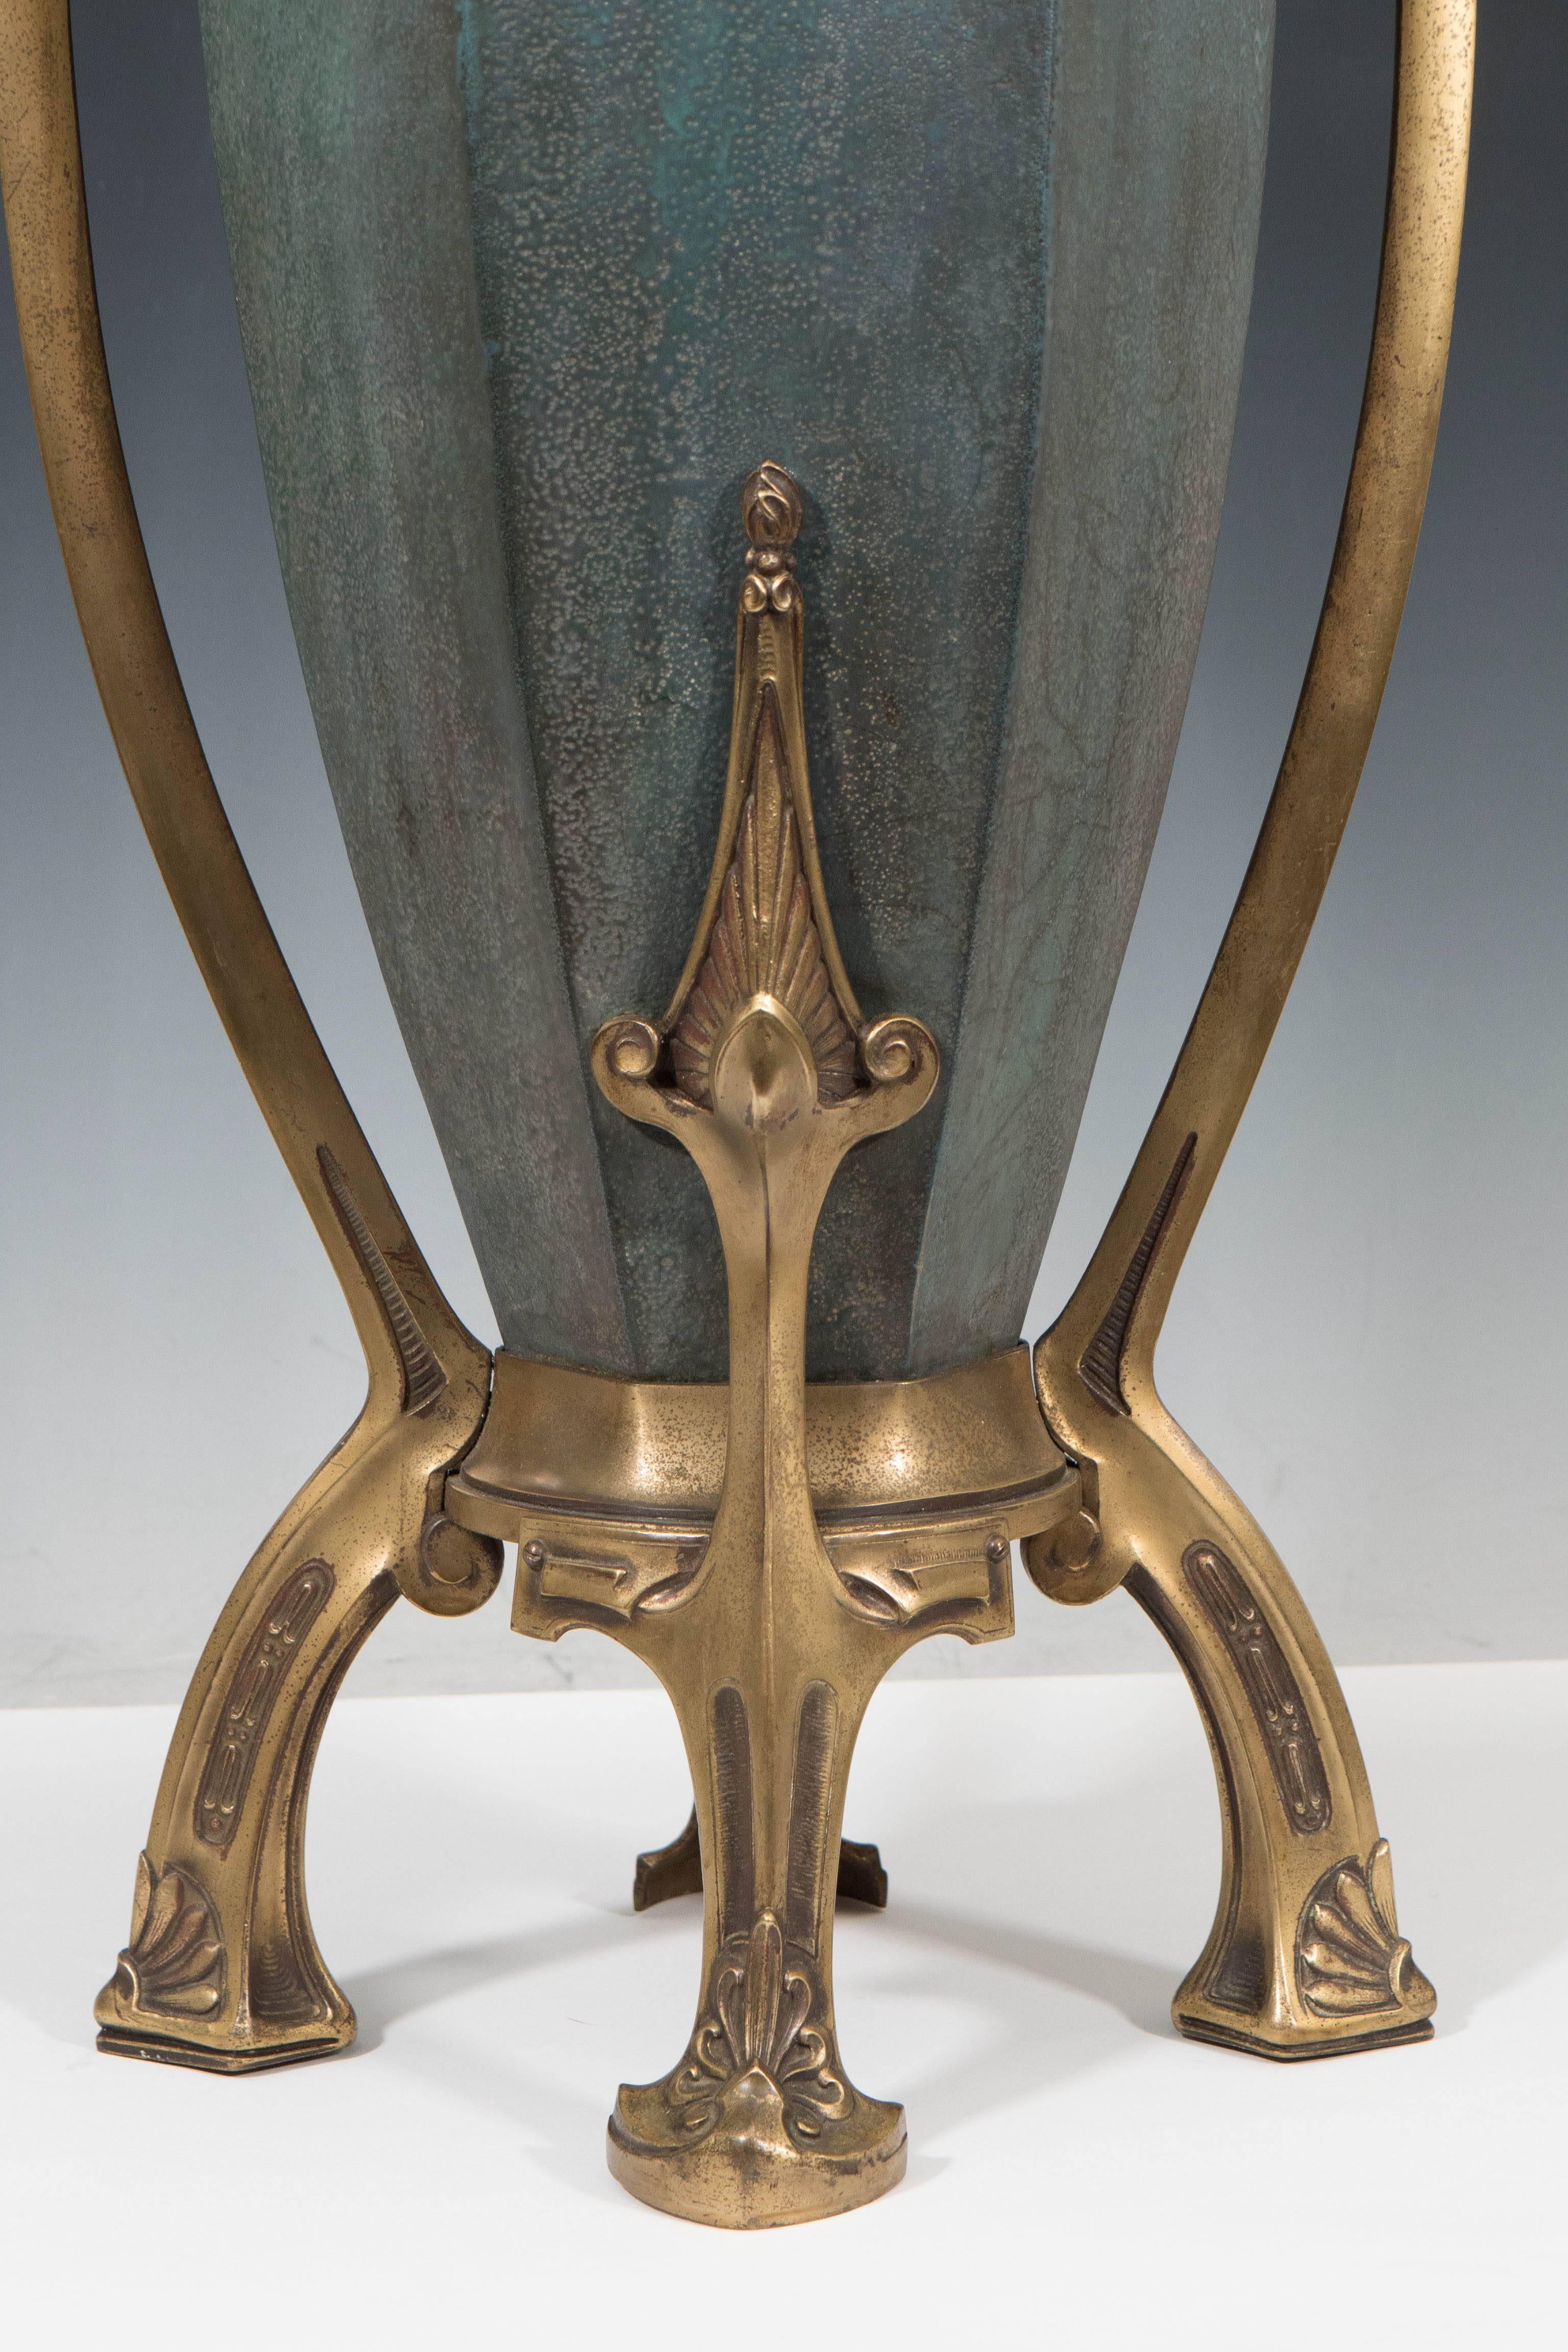 This ceramic Amphora vase with matte finish and elaborate bronze mounting was produced circa 1900s by Paul Dachsel. The flowing shape of the raised bronze handles and artfully applied details to this exhibition piece make it a stunning example of